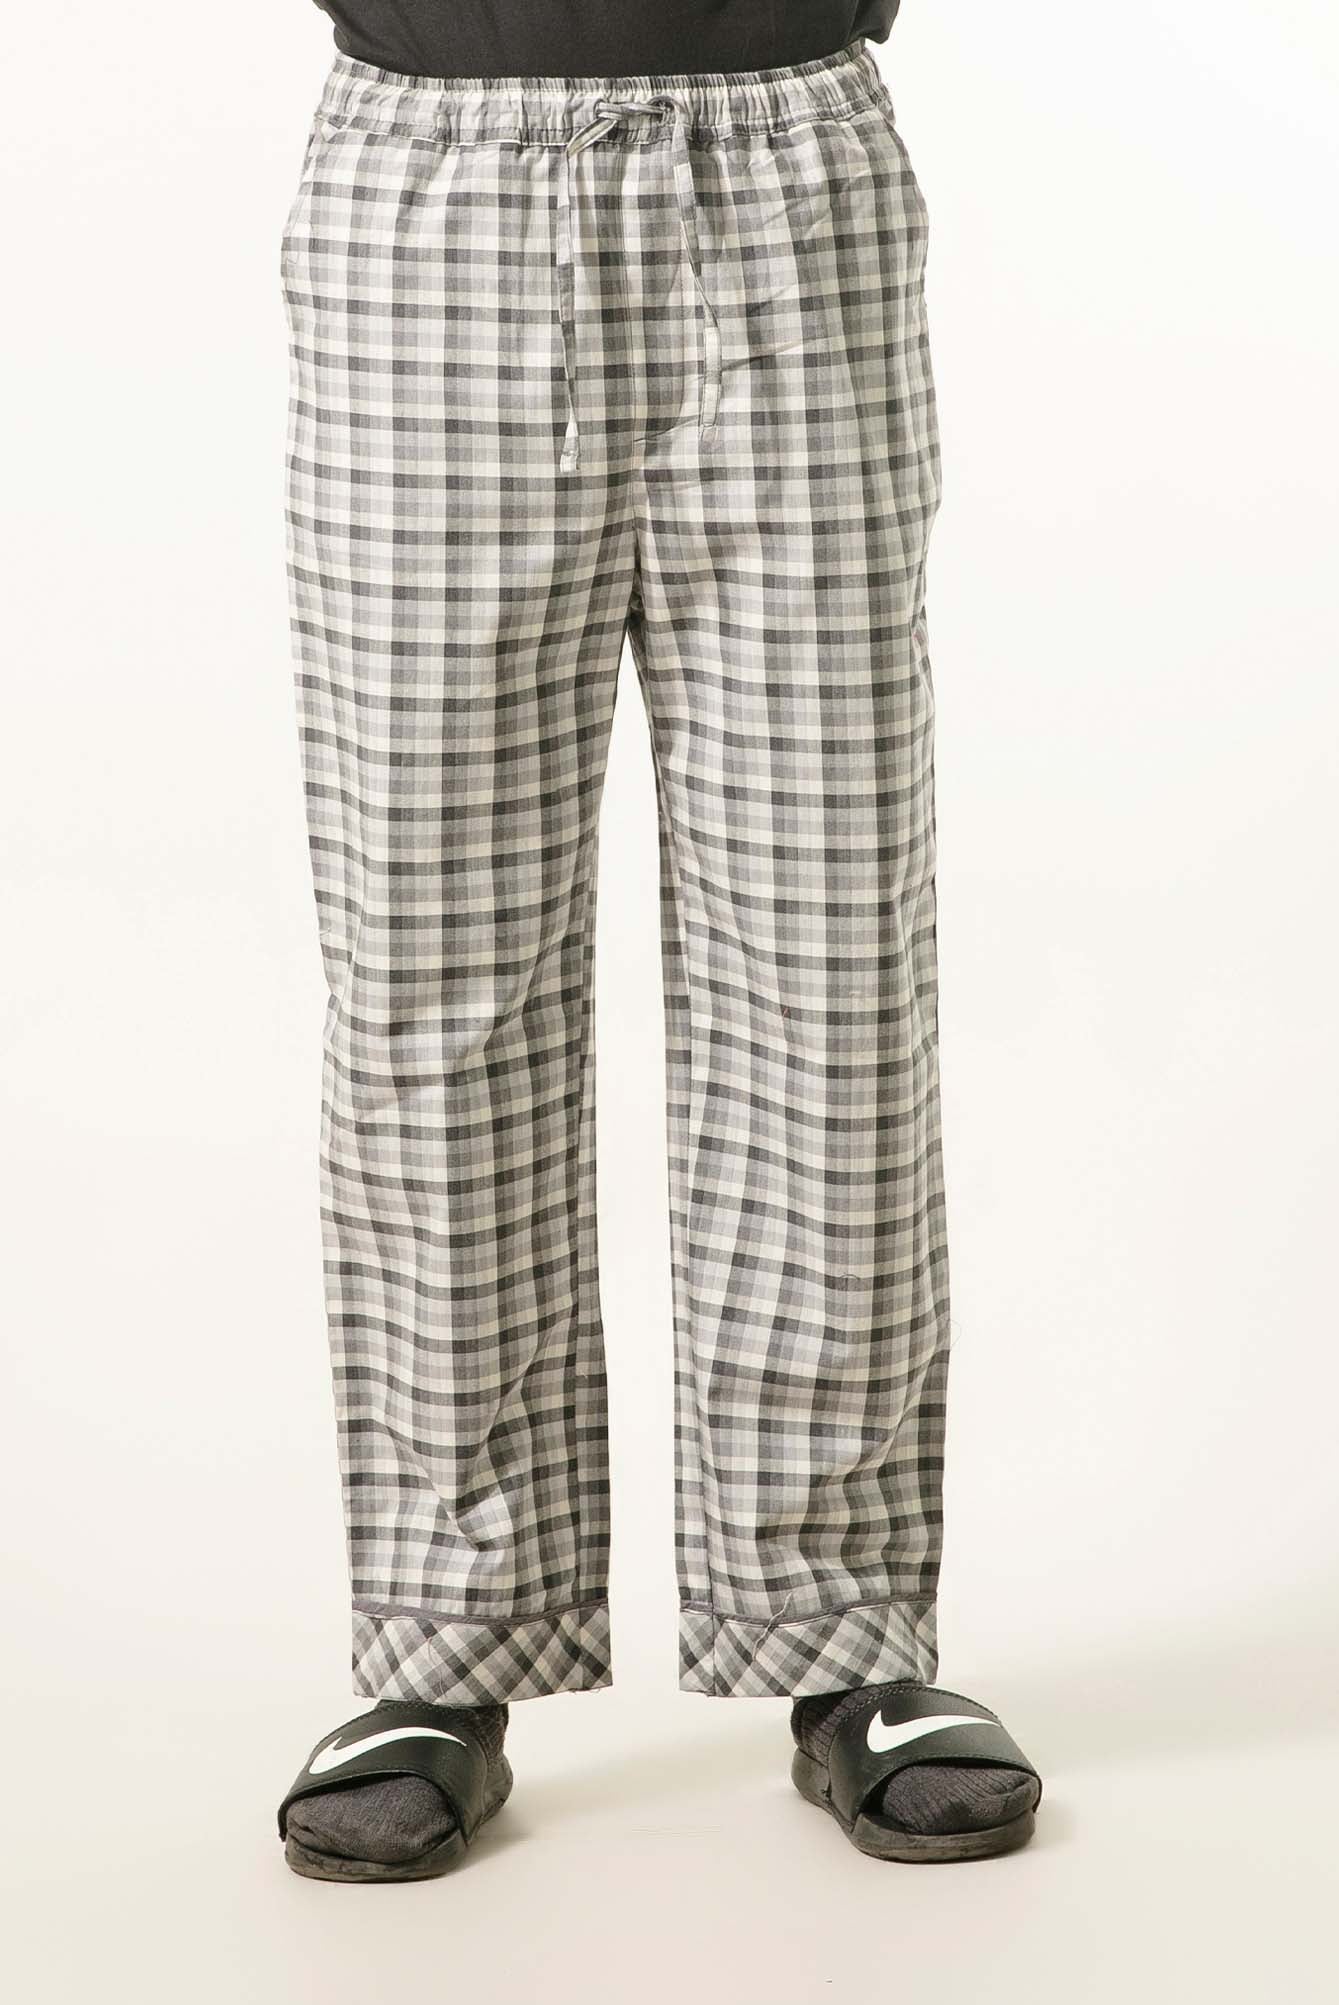 GTS-6340 PULL ON TROUSER GREY CHECK